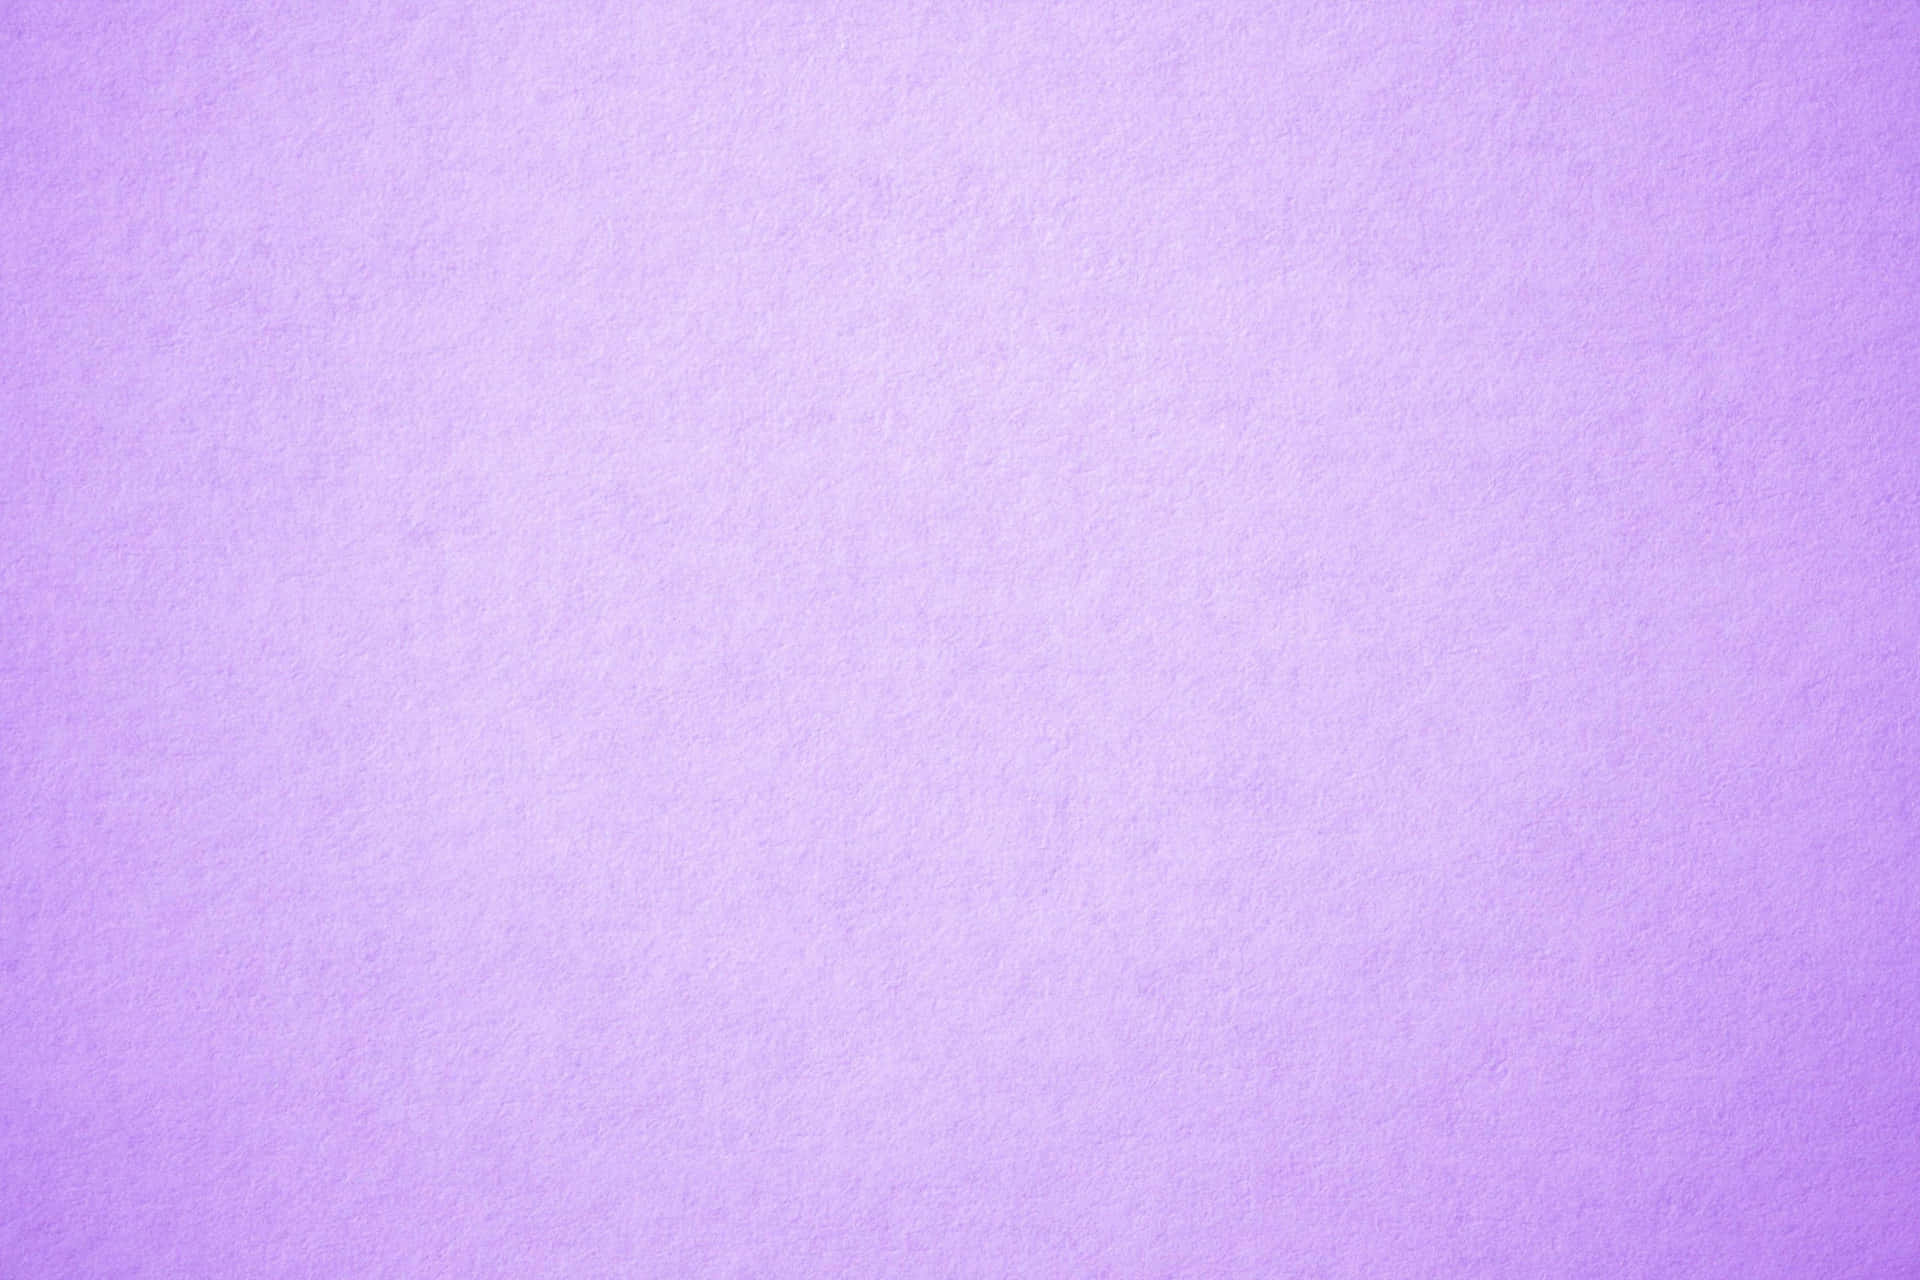 A Vibrant Purple Abstract Textured Background